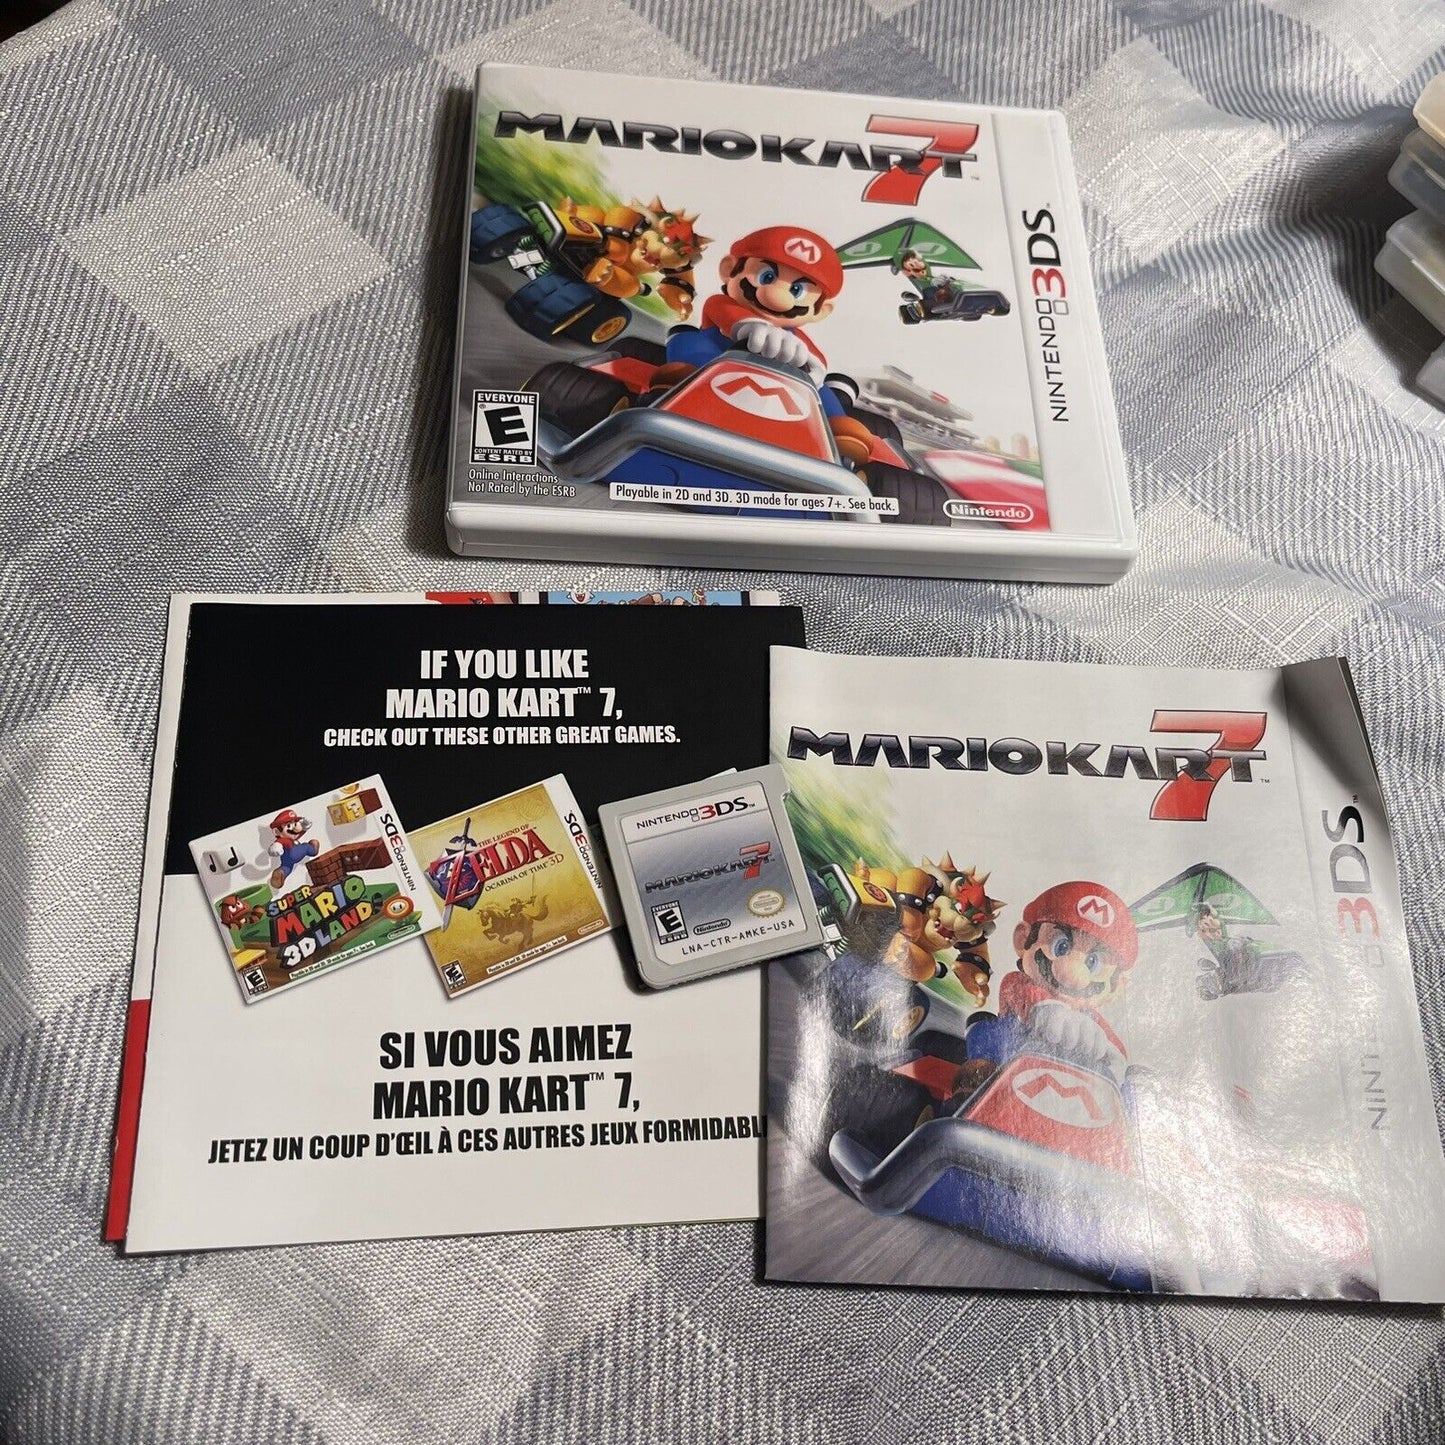 Mario Kart 7 Nintendo 3DS 2011 Complete with Manual Tested and Working